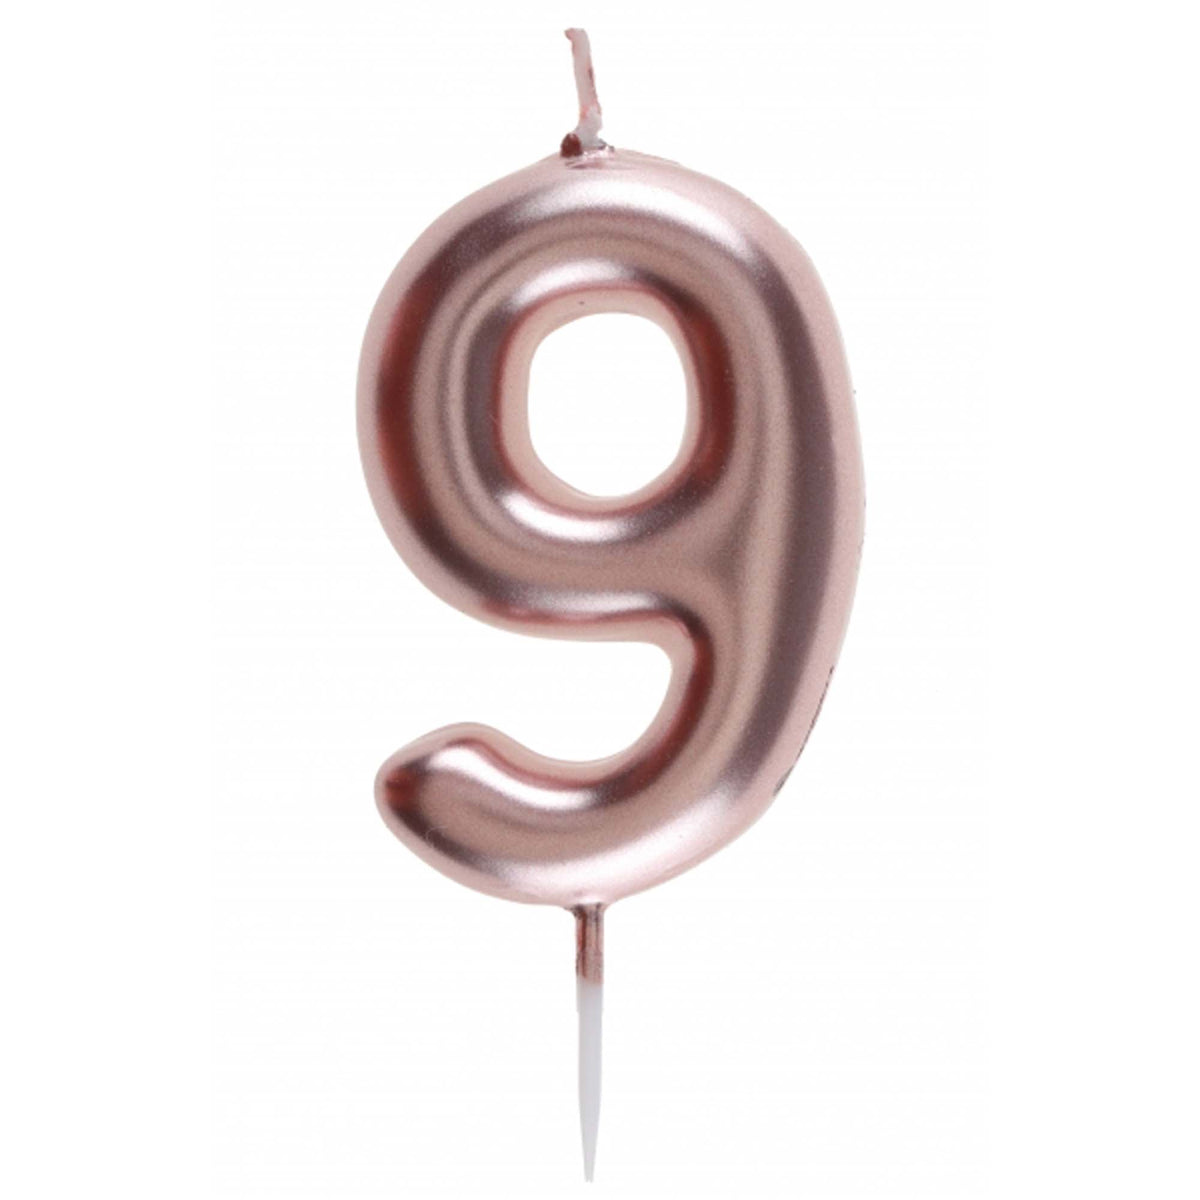 SANTEX Cake Supplies Rose Gold Number 9 Birthday Candle, 1 Count 3660380068860